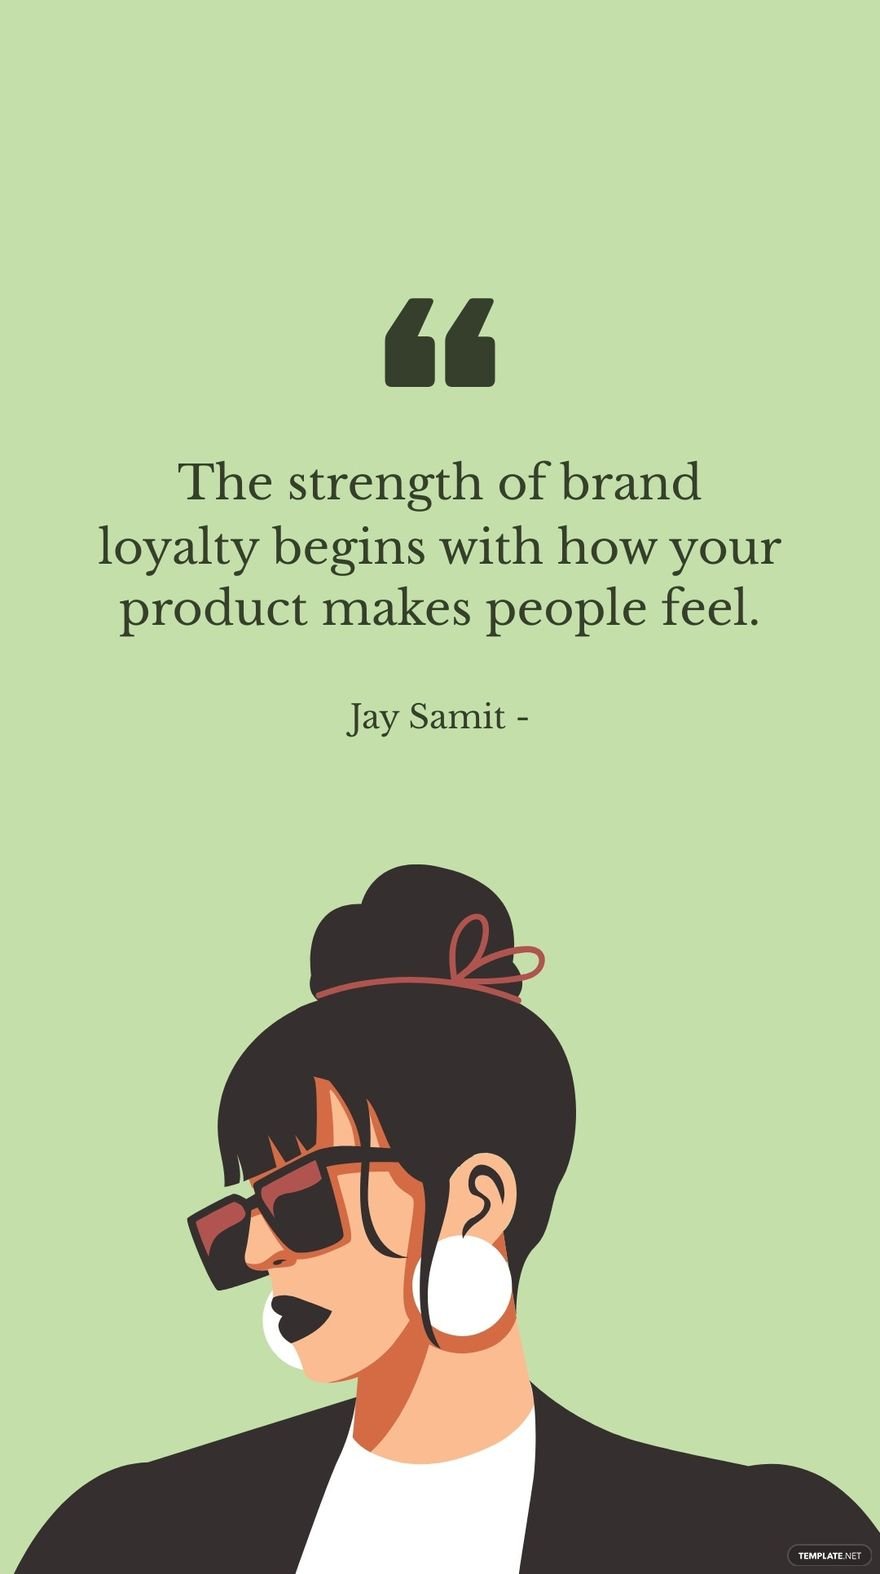 Jay Samit - The strength of brand loyalty begins with how your product makes people feel.